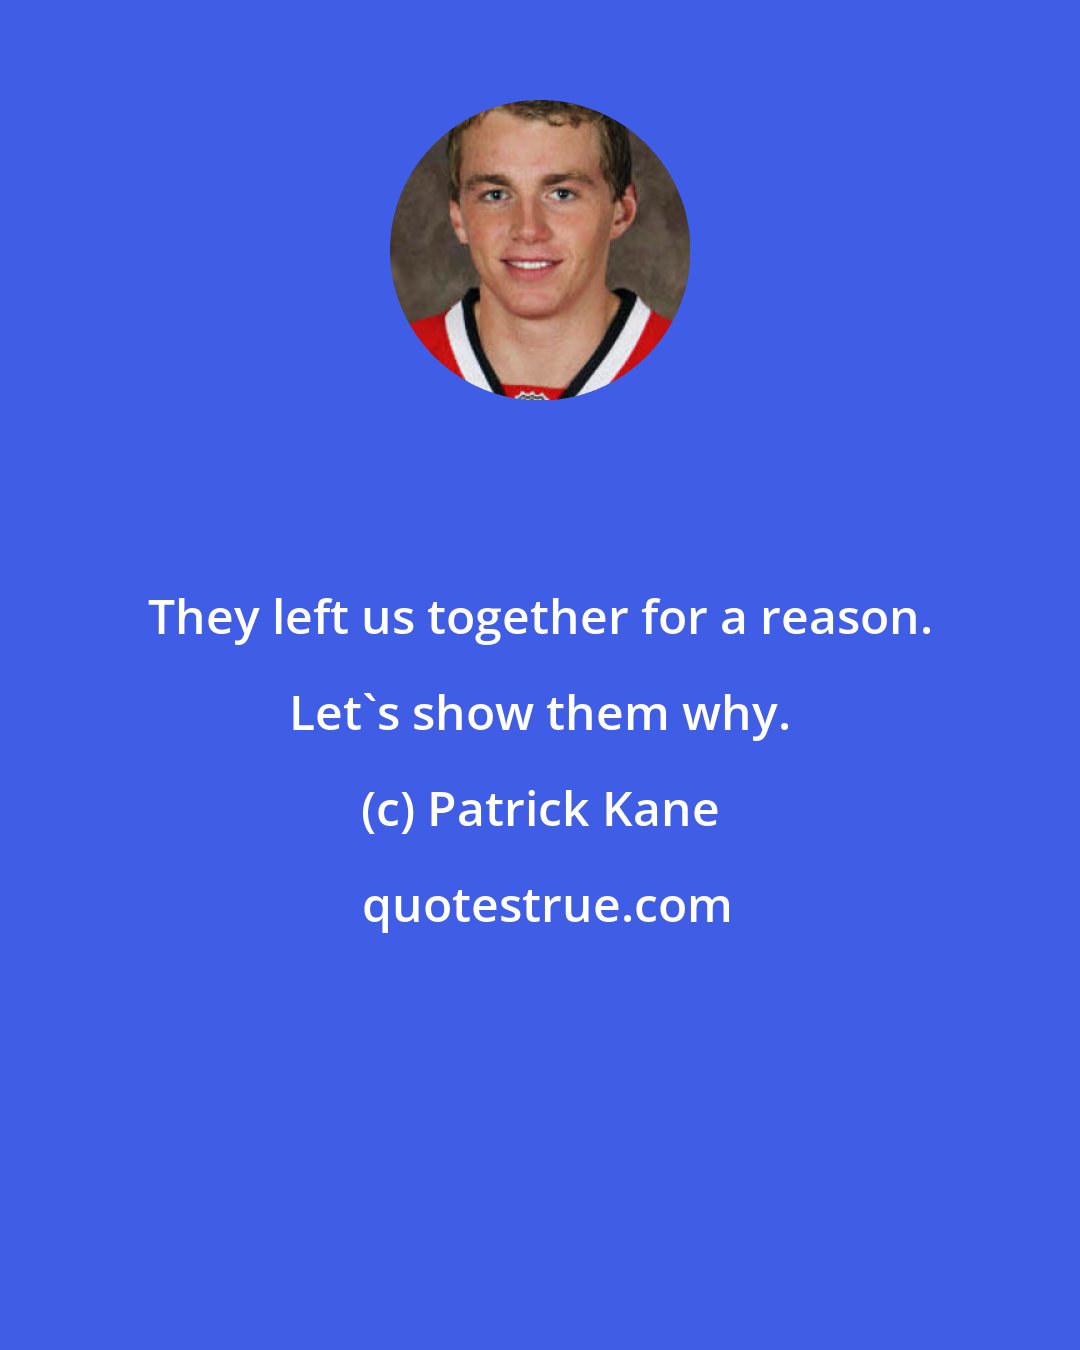 Patrick Kane: They left us together for a reason. Let's show them why.